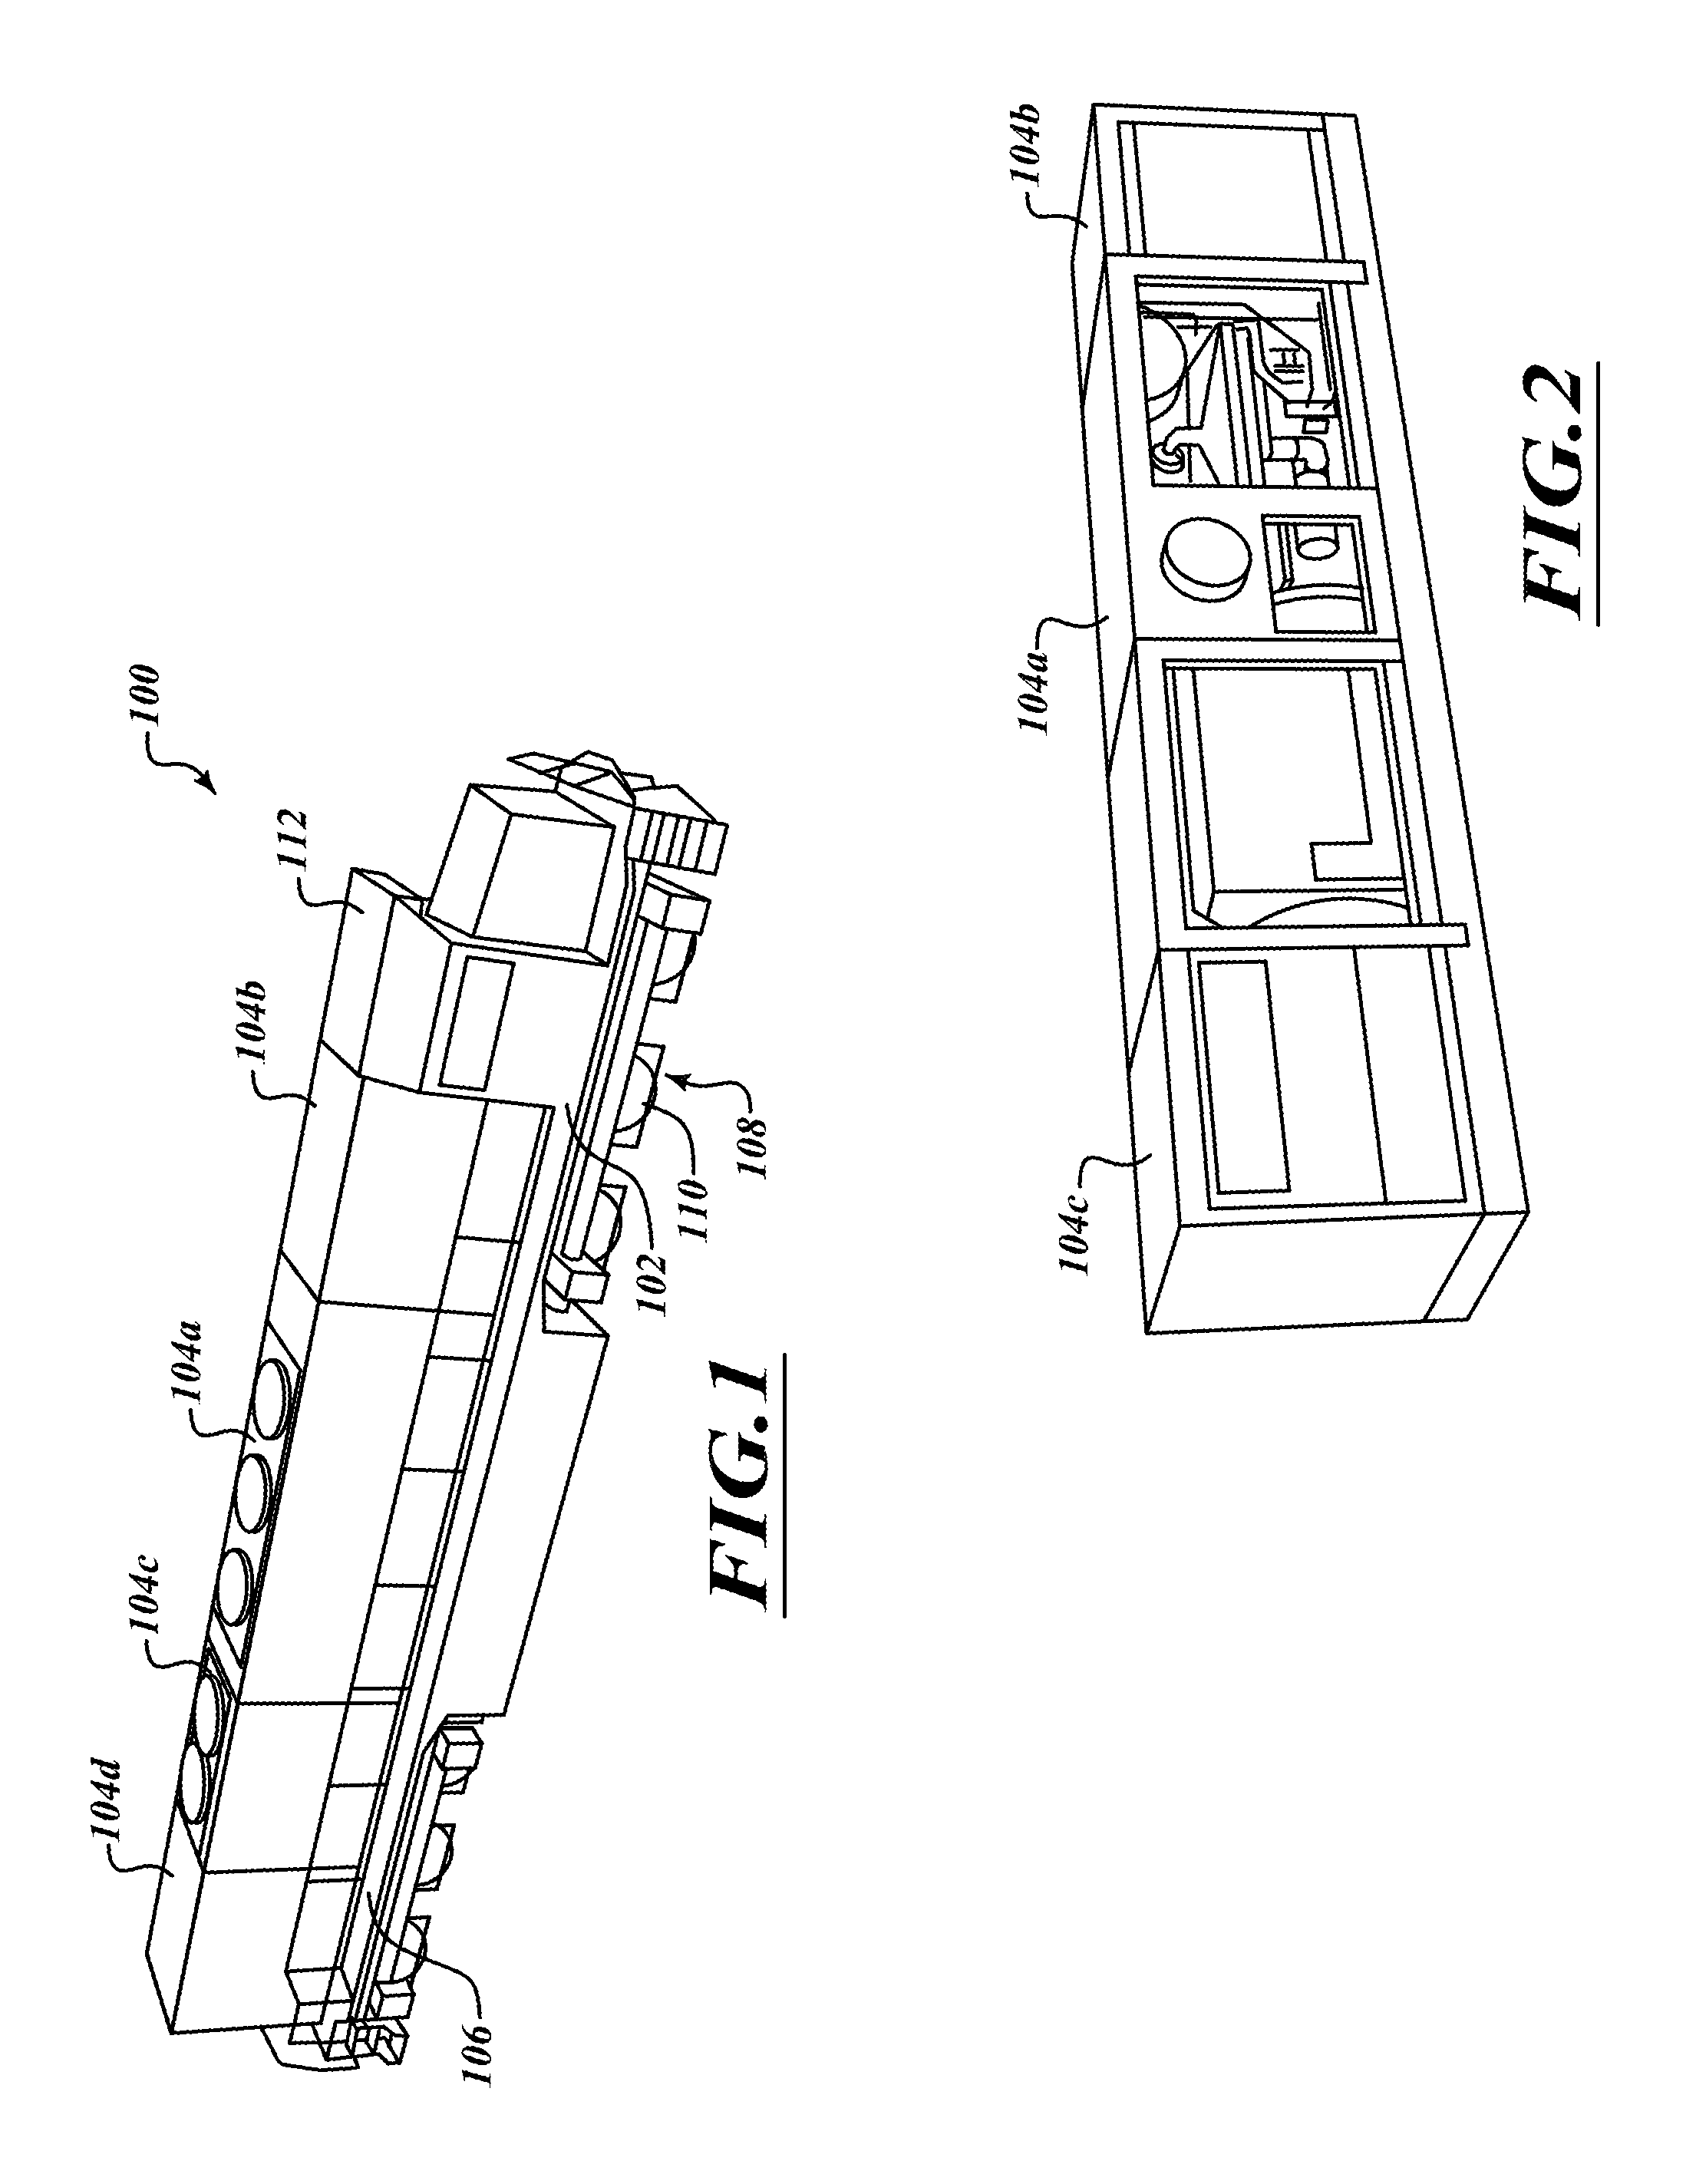 Apparatus and method for power production, control, and/or telematics, suitable for use with locomotives